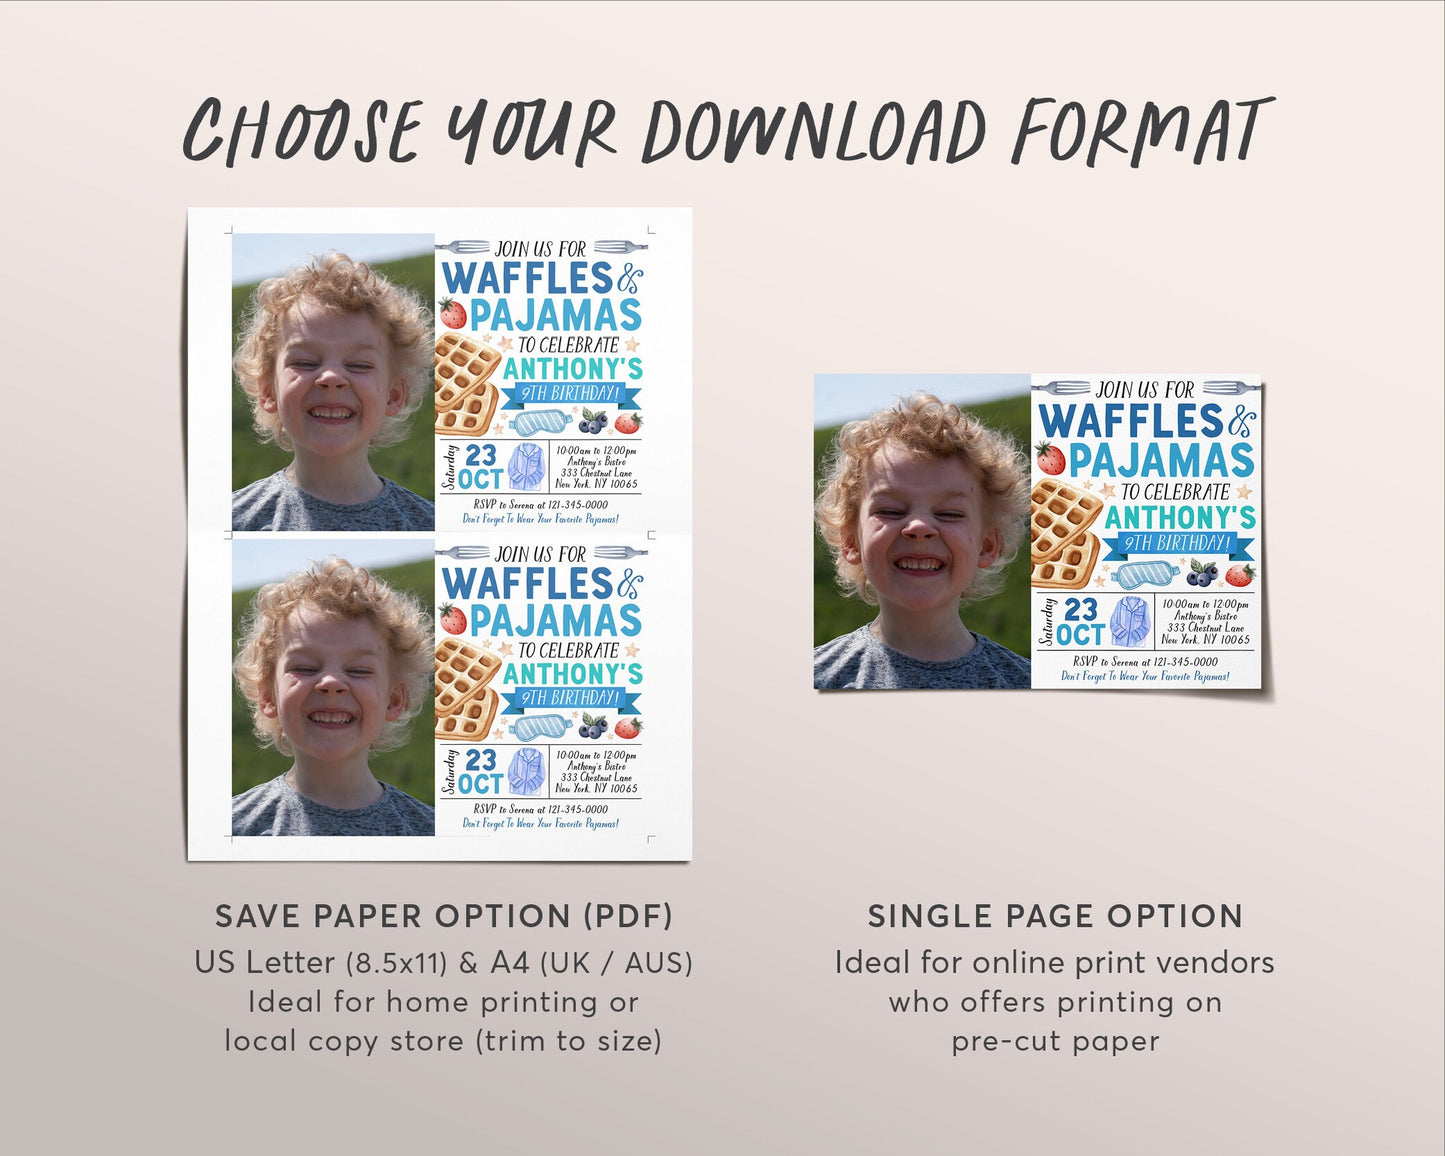 Waffles and Pajamas Birthday Invitation With Photo Editable Template, Boy Waffles And PJs Party Invite, Kids Breakfast Brunch Evite